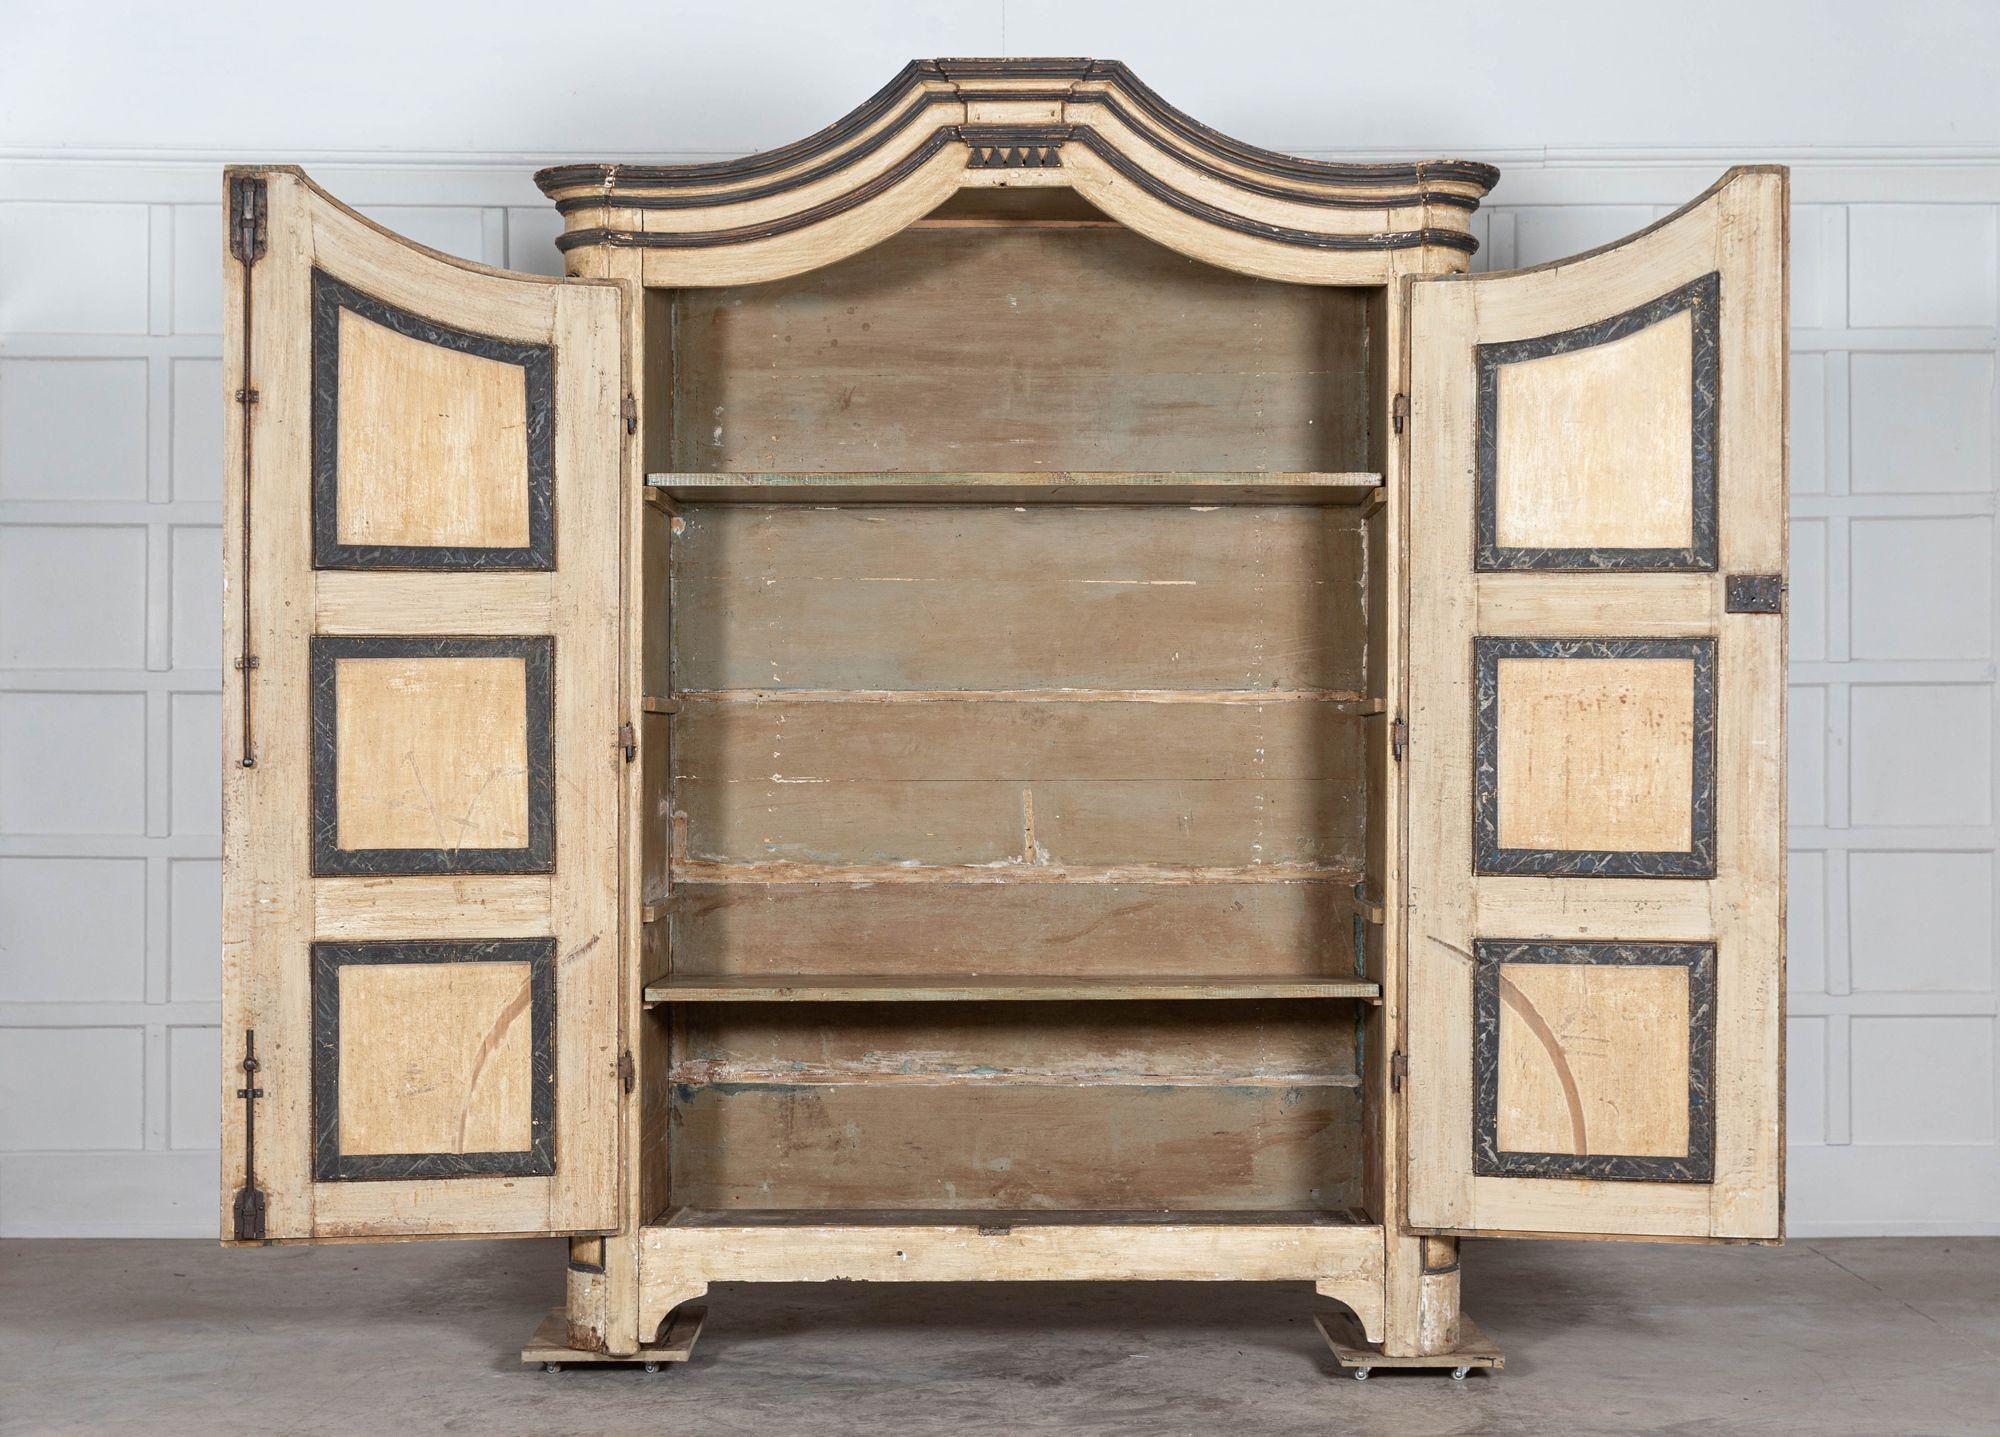 circa 1780
Large 18th C painted Austrian armoire
We can also customise existing pieces to suit your scheme/requirements. We have our own workshop, restorers and finishers. From adapting to finishing pieces including, stripping, bleaching,